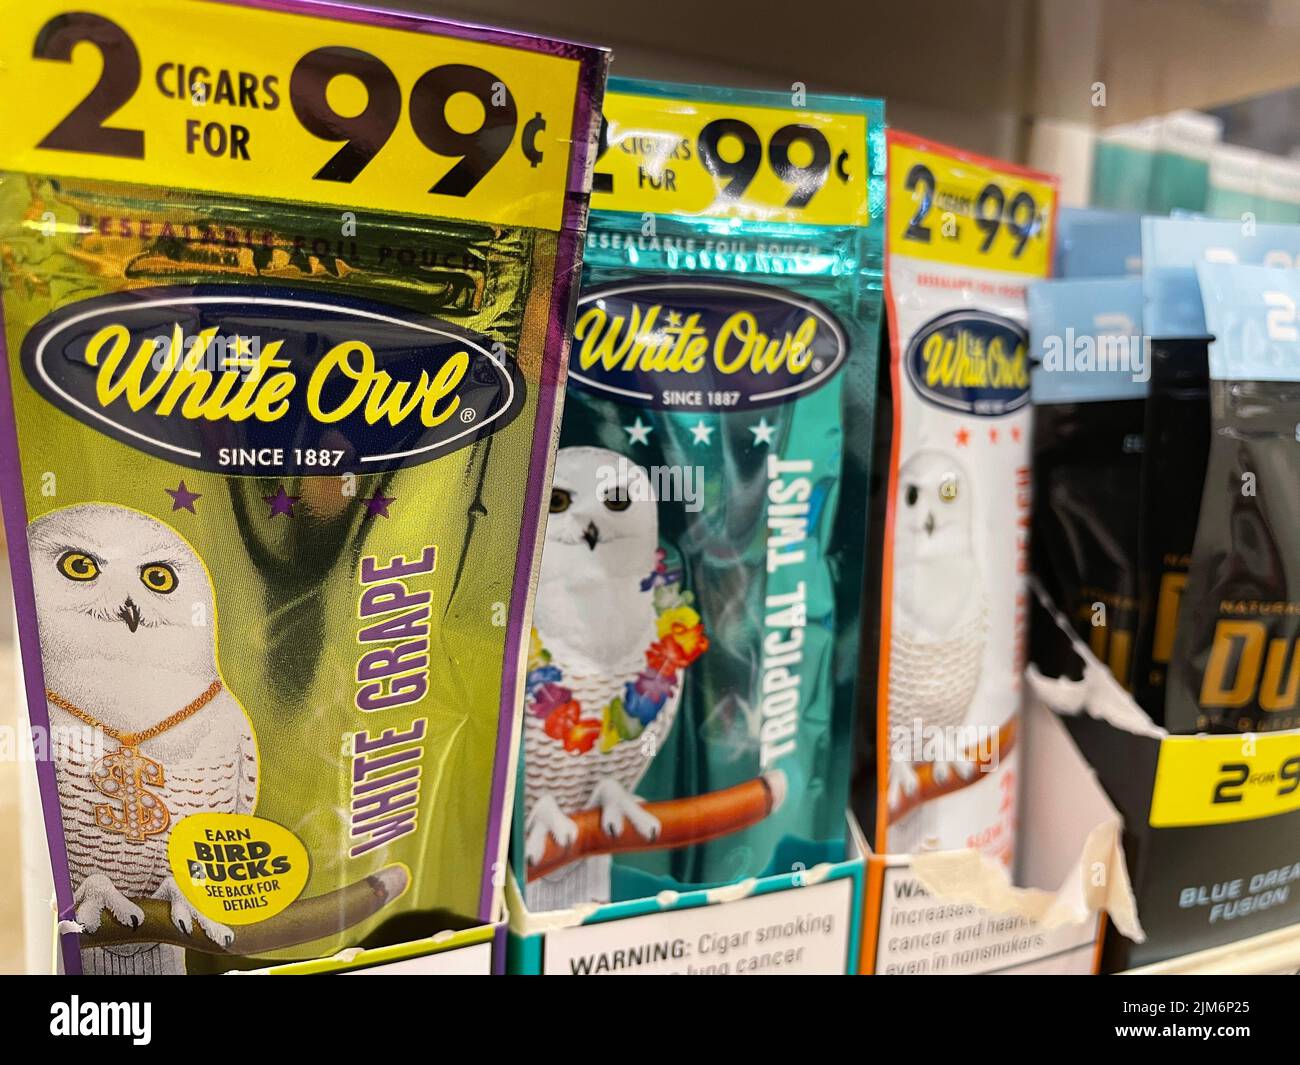 Grovetown, Ga USA - 05 03 22: Flavored Cigars blunts in a retail store White Owl variety Stock Photo